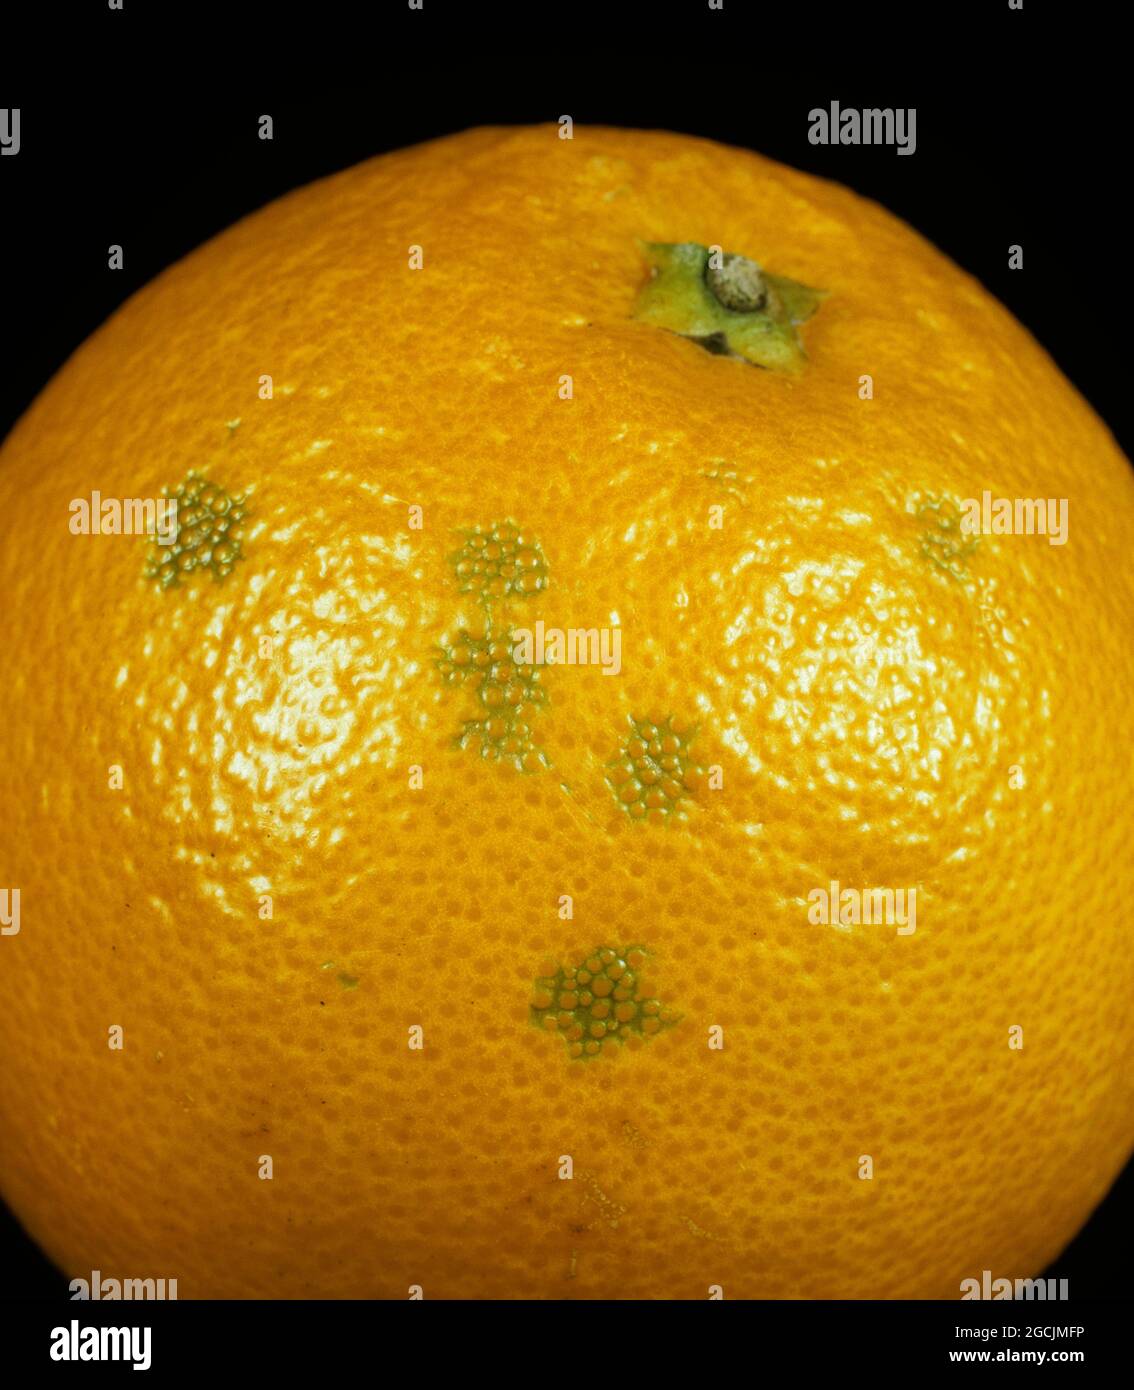 Olleocellosis, a phsiological rind disorder causing blemishes in orange peel after rupture of the peel oil glands causing a toxic reaction in the peri Stock Photo